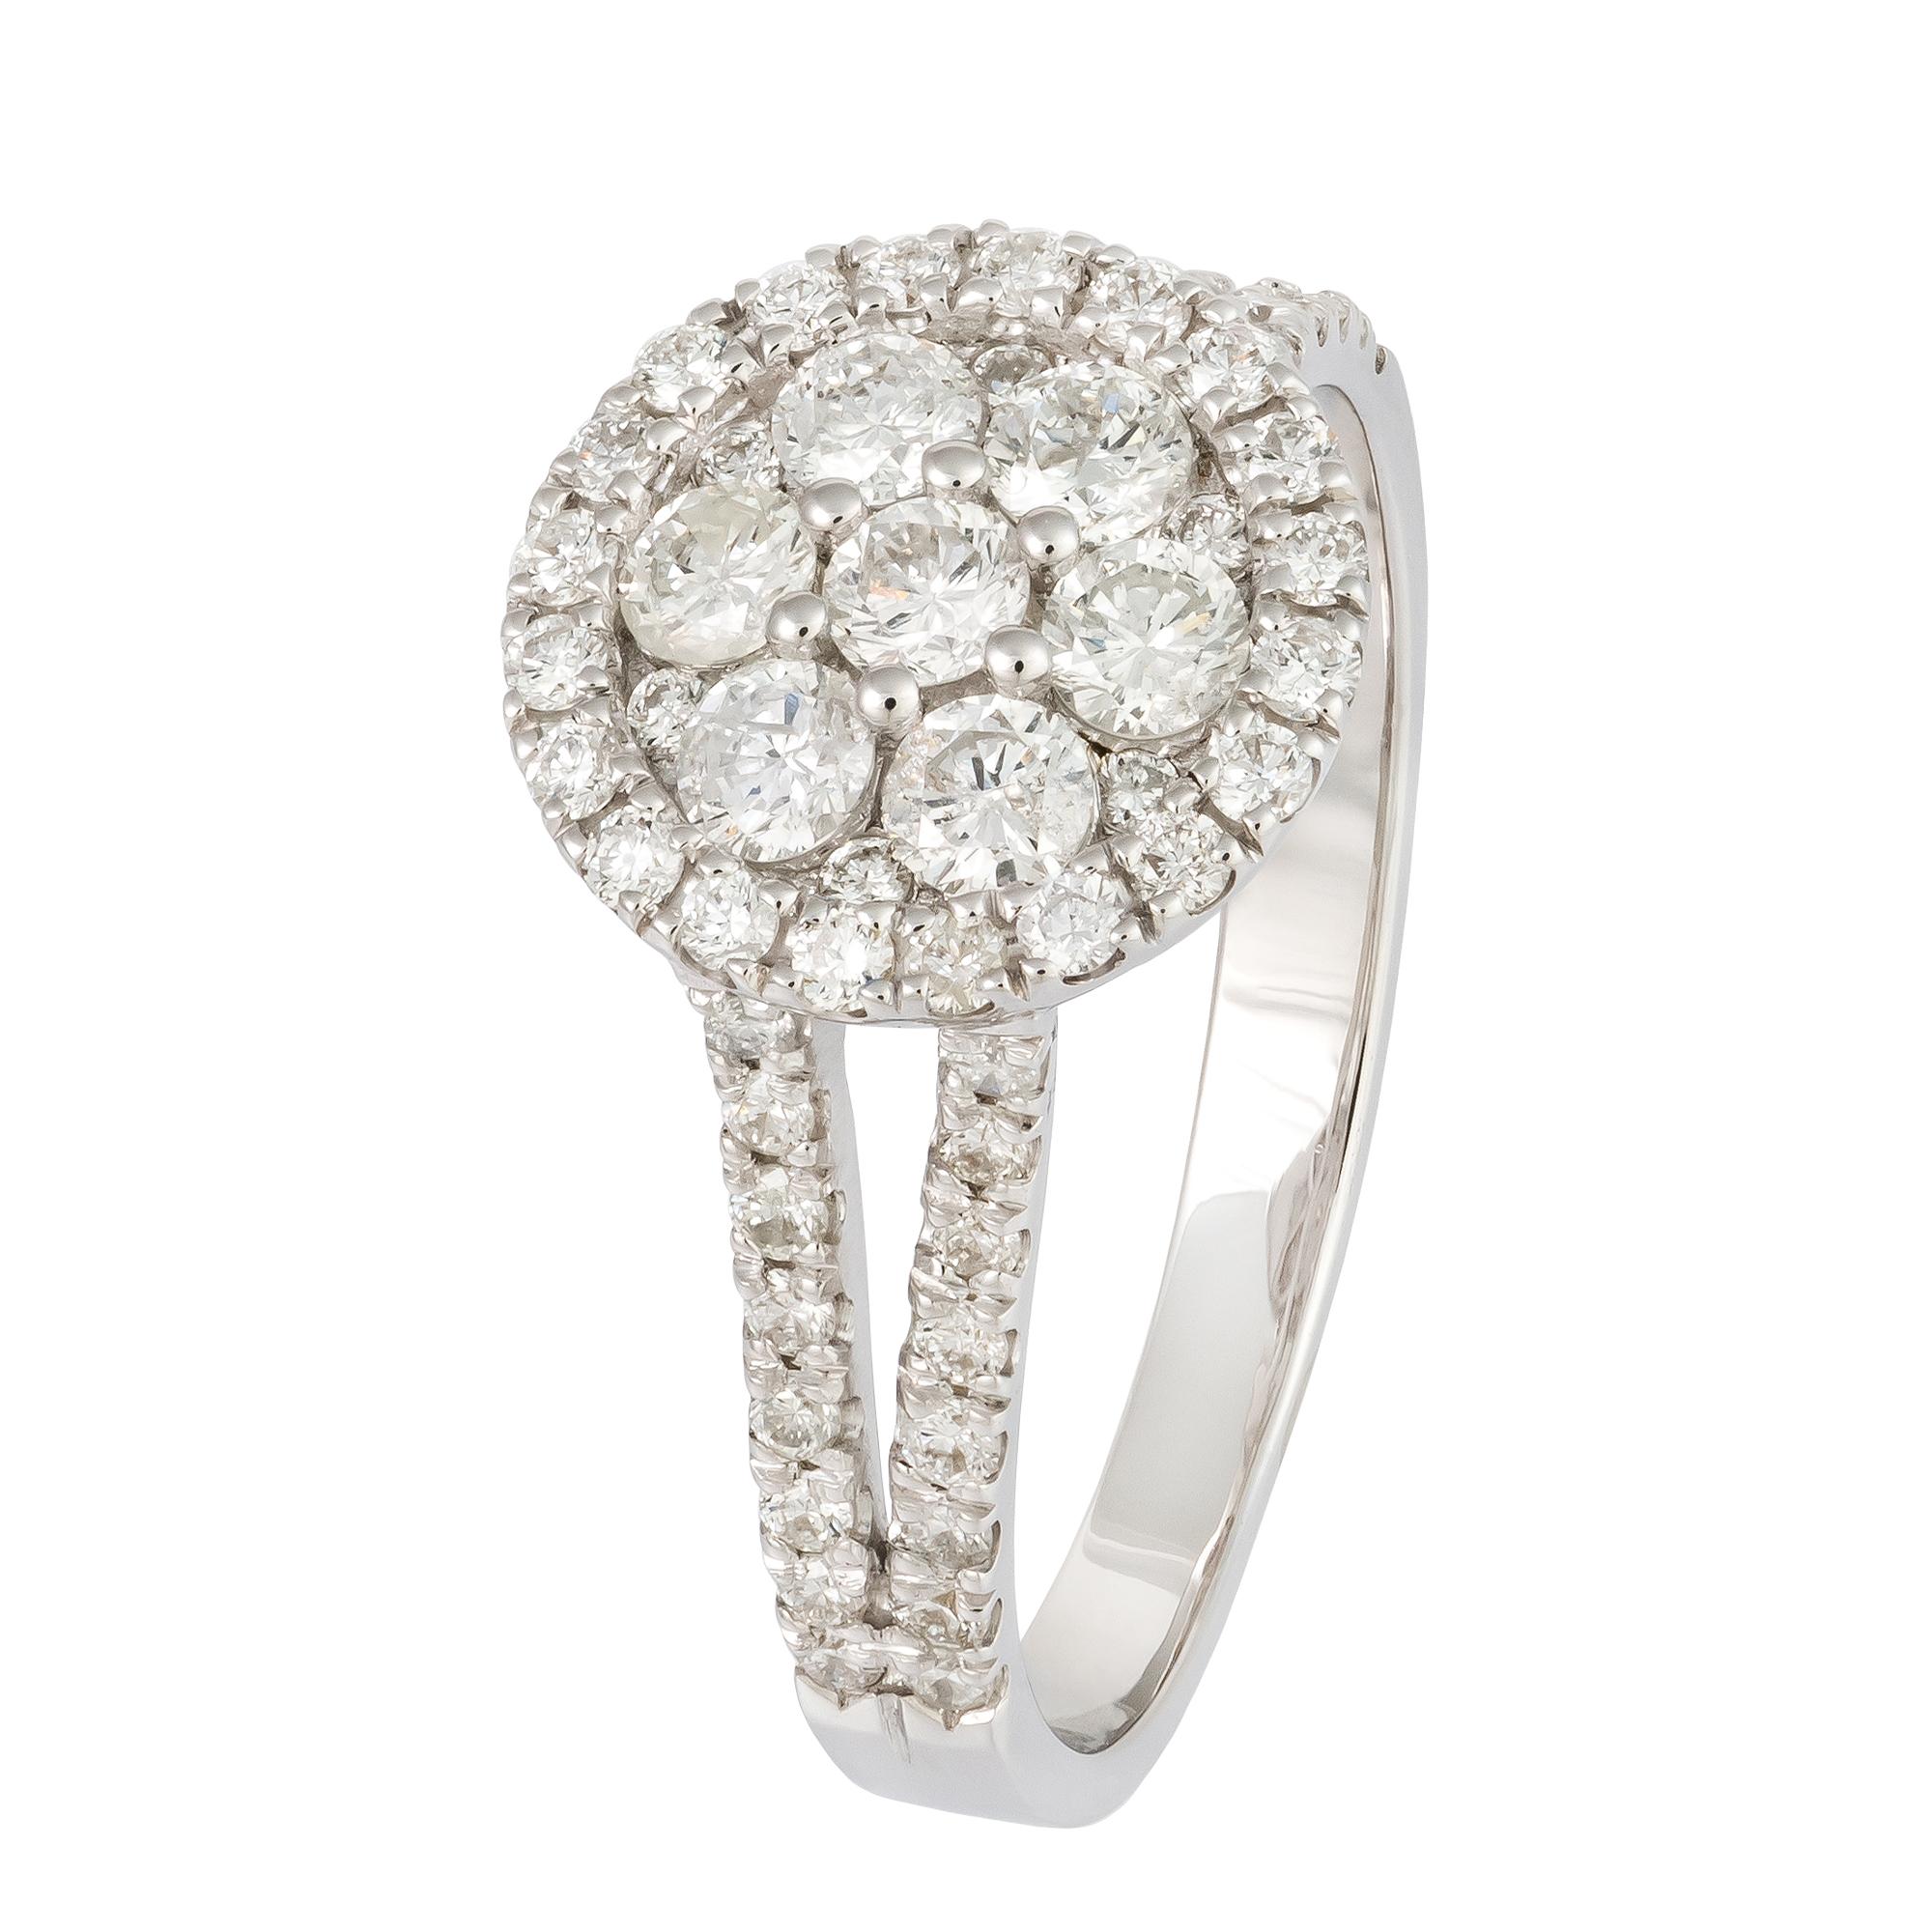 For Sale:  Statement  White 18K Gold White Diamond Ring For Her 2